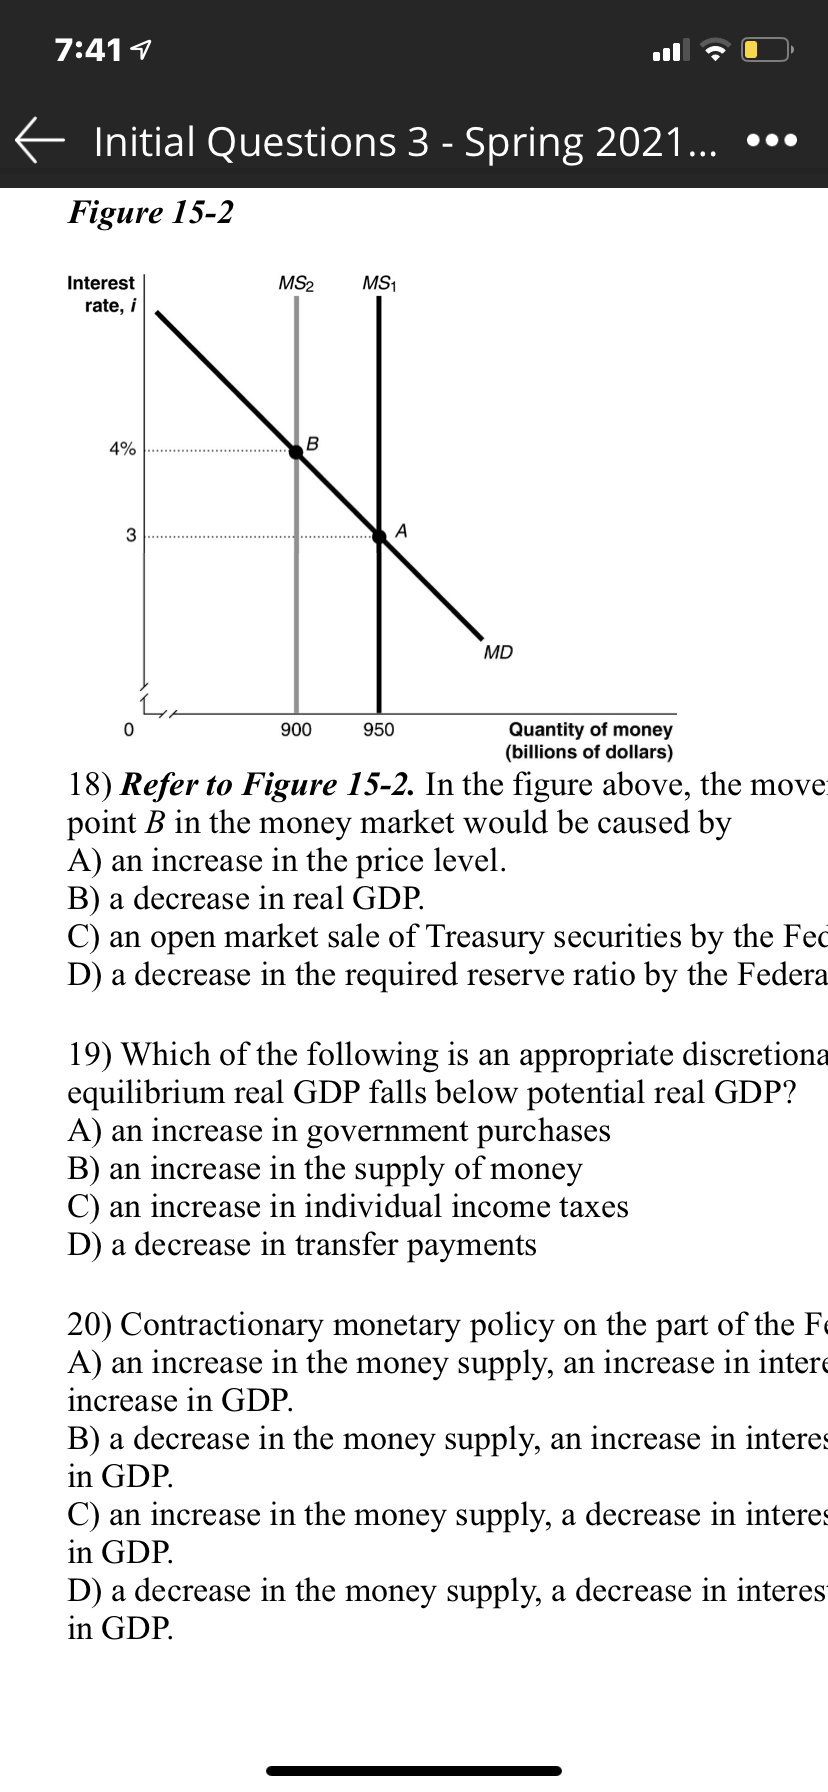 7:411
E Initial Questions 3 - Spring 2021... •••
Figure 15-2
Interest
MS2
MS1
rate, i
4%
3
A
MD
Quantity of money
(billions of dollars)
900
950
18) Refer to Figure 15-2. In the figure above, the move
point B in the money market would be caused by
A) an increase in the price level.
B) a decrease in real GDP.
C) an open market sale of Treasury securities by the Fec
D) a decrease in the required reserve ratio by the Federa
19) Which of the following is an appropriate discretiona
equilibrium real GDP falls below potential real GDP?
A) an increase in government purchases
B) an increase in the supply of money
C) an increase in individual income taxes
D) a decrease in transfer payments
20) Contractionary monetary policy on the part of the Fe
A) an increase in the money supply, an increase in intere
increase in GDP.
B) a decrease in the money supply, an increase in interes
in GDP.
C) an increase in the money supply, a decrease in interes
in GDP.
D) a decrease in the money supply, a decrease in interes
in GDP.
